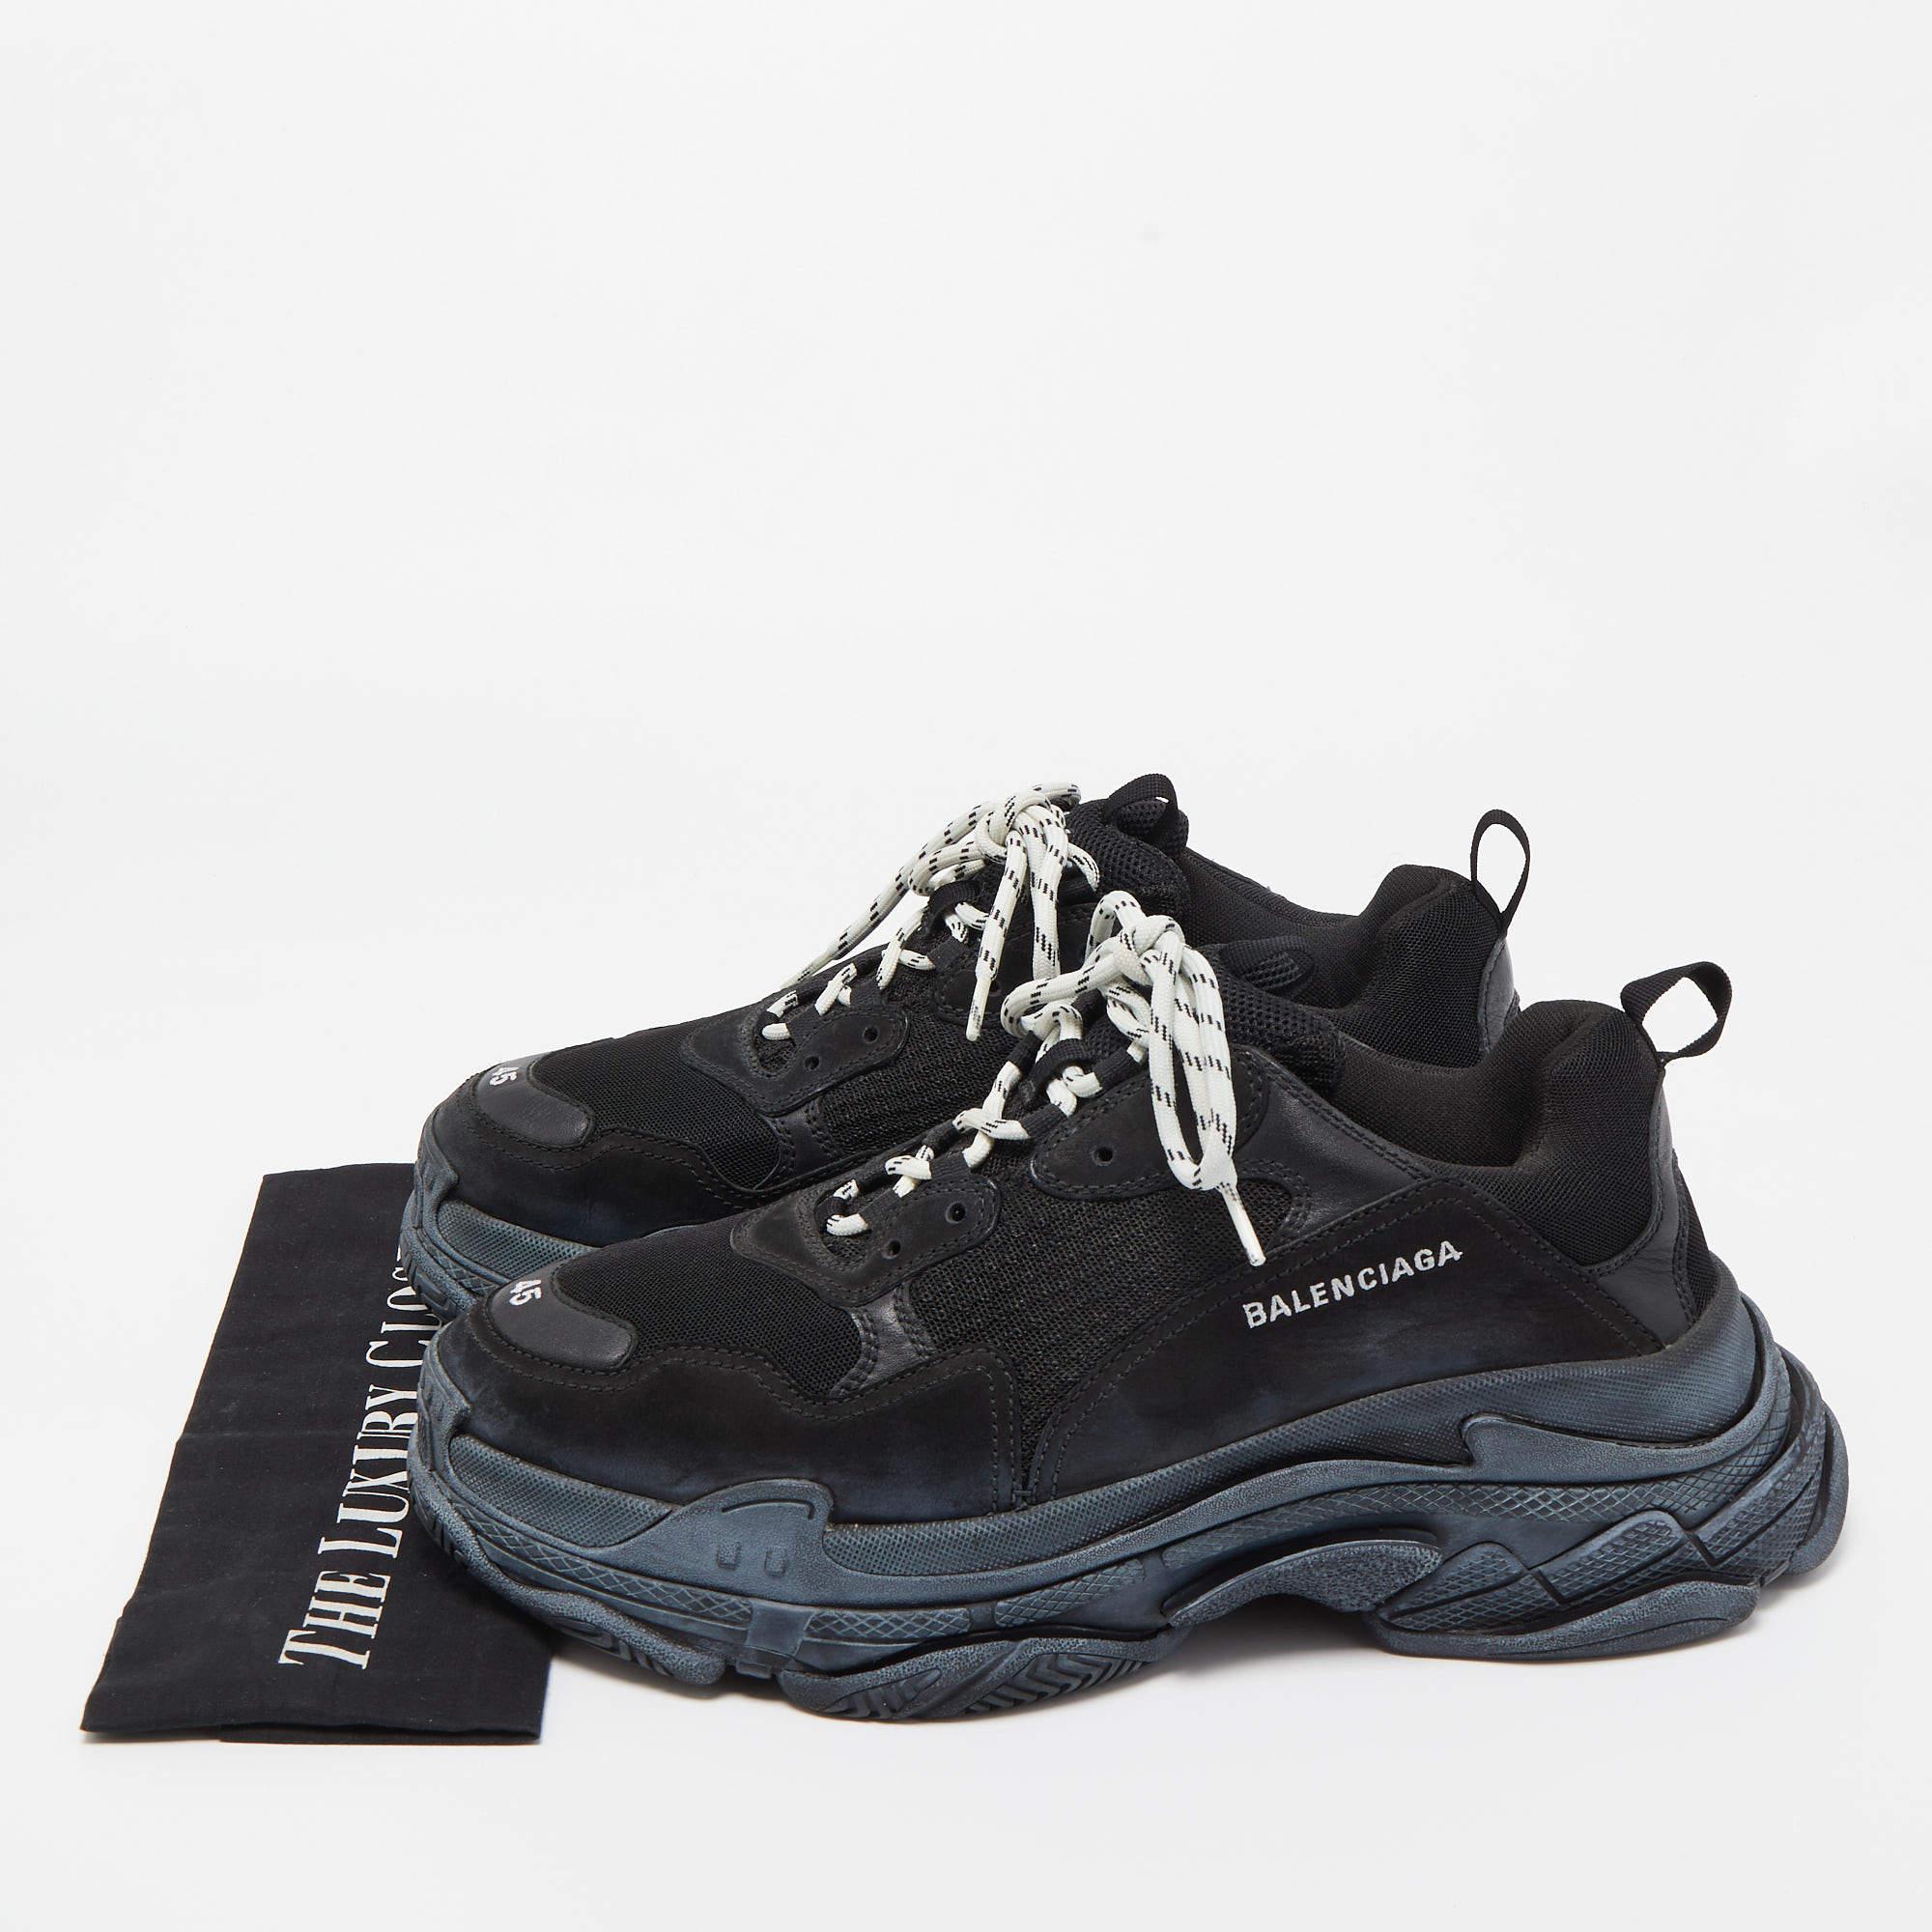 Balenciaga Black Nubuck Leather and Mesh Triple S Low Top Sneakers Size 45 5